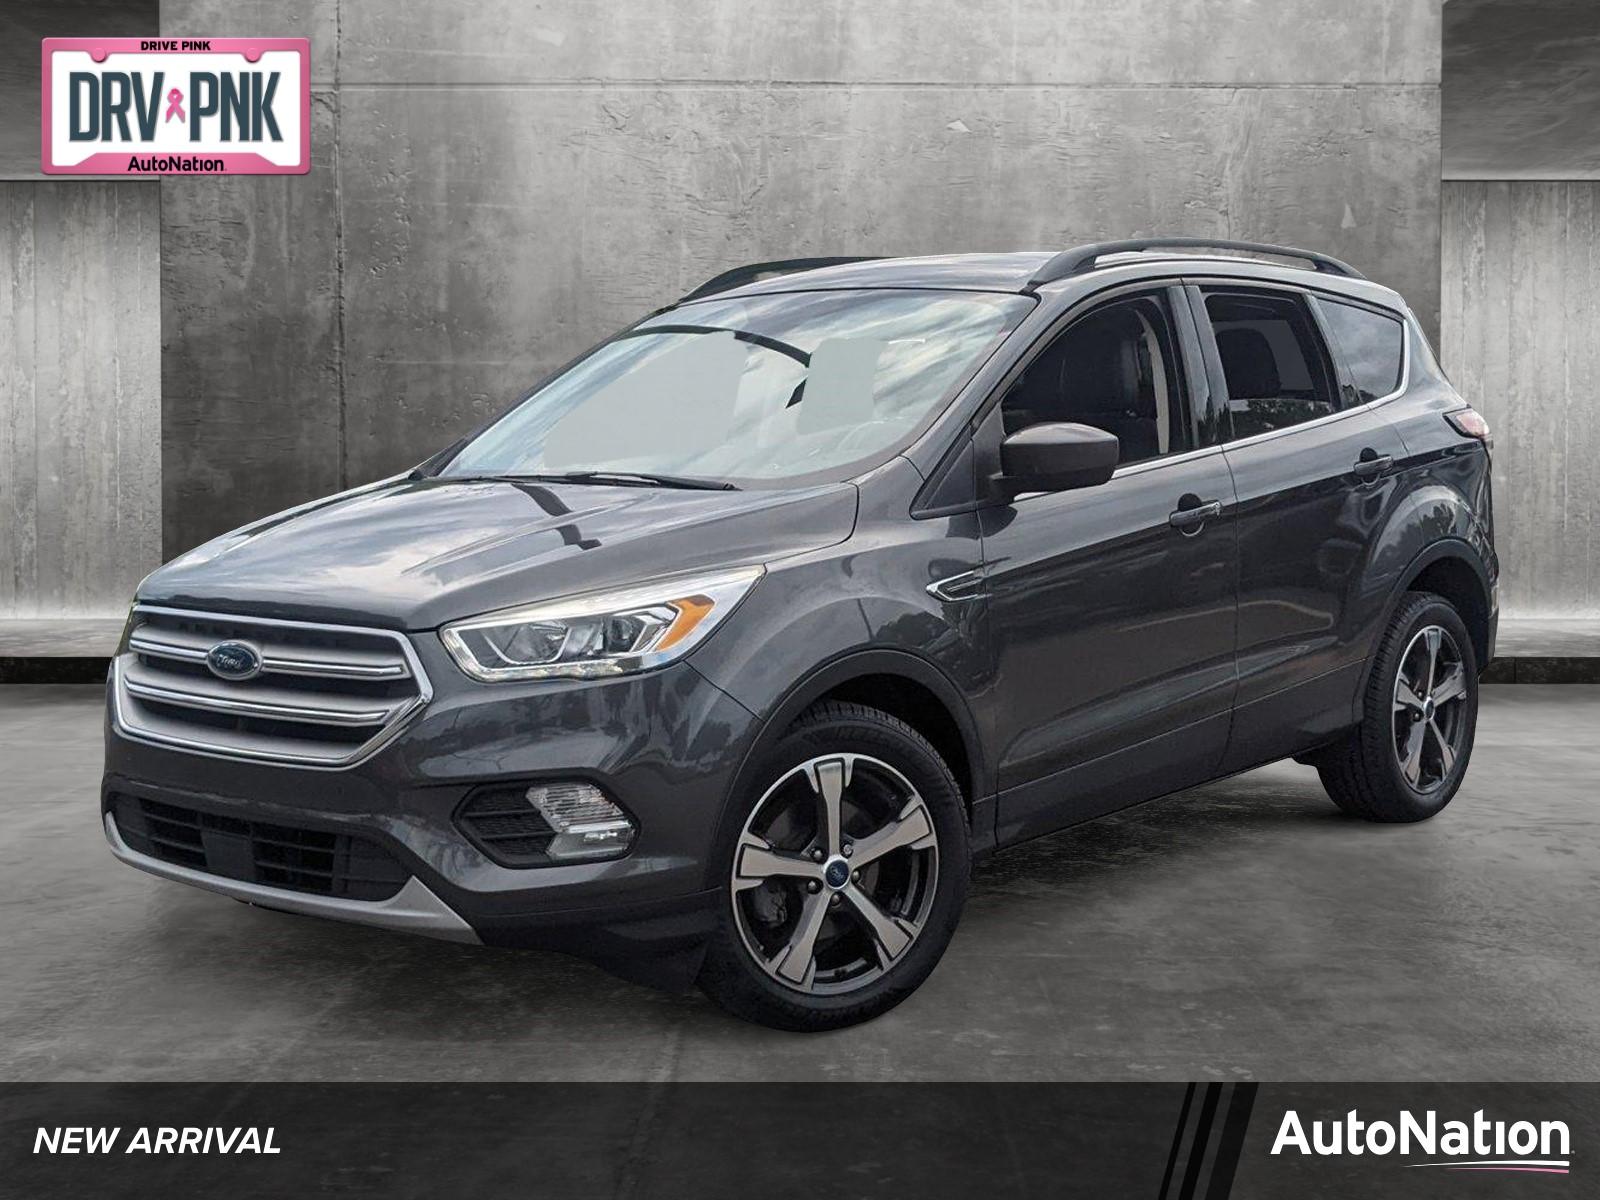 2018 Ford Escape Vehicle Photo in Jacksonville, FL 32244